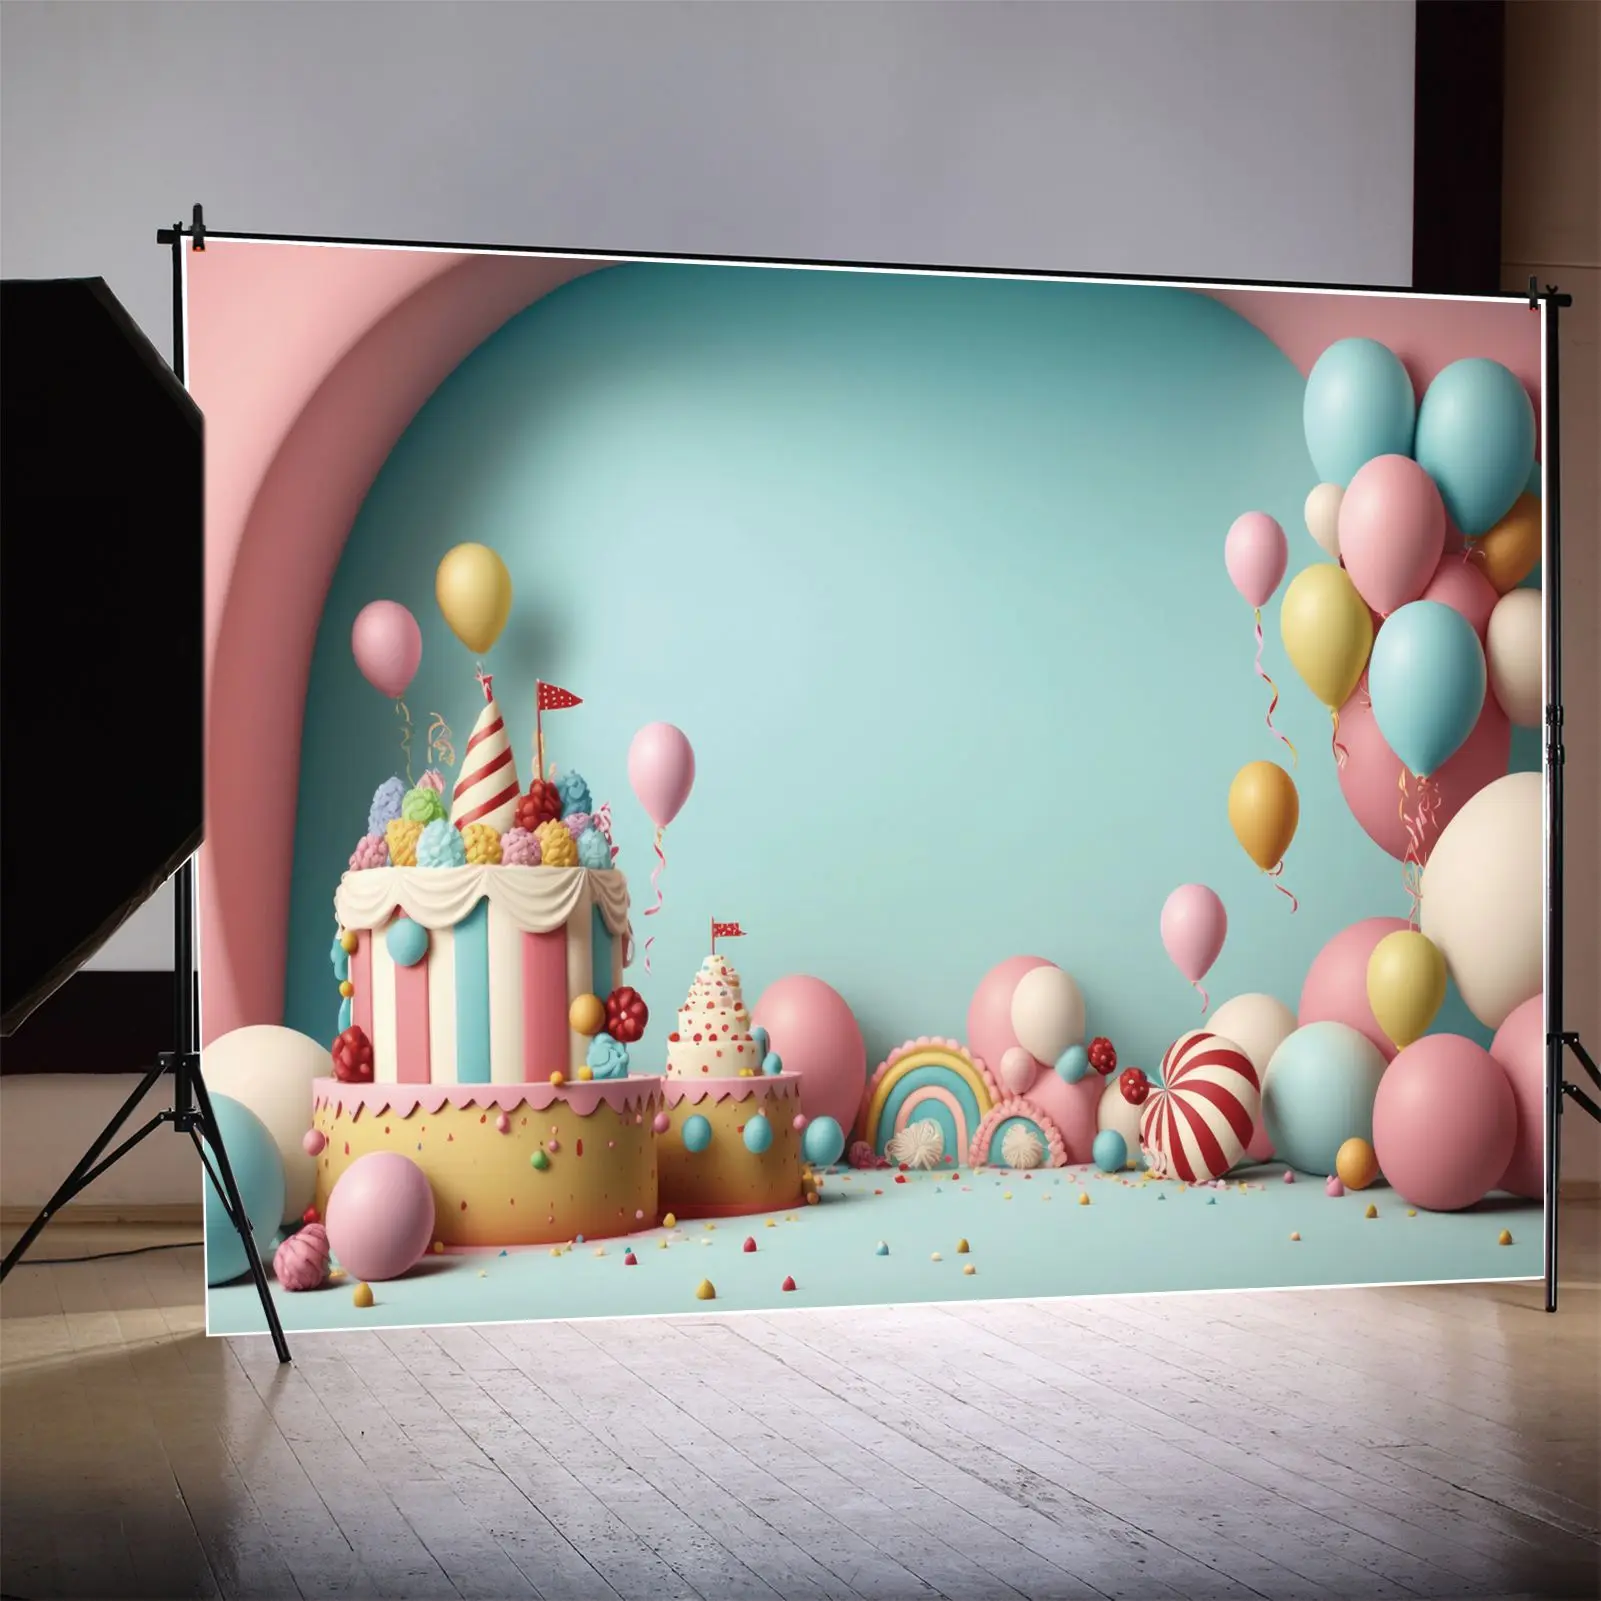 

Party Birthday Cake Backdrops Photography Balloons Arch Wall Customized Children's Photobooth Photo Background Photoshoot Props